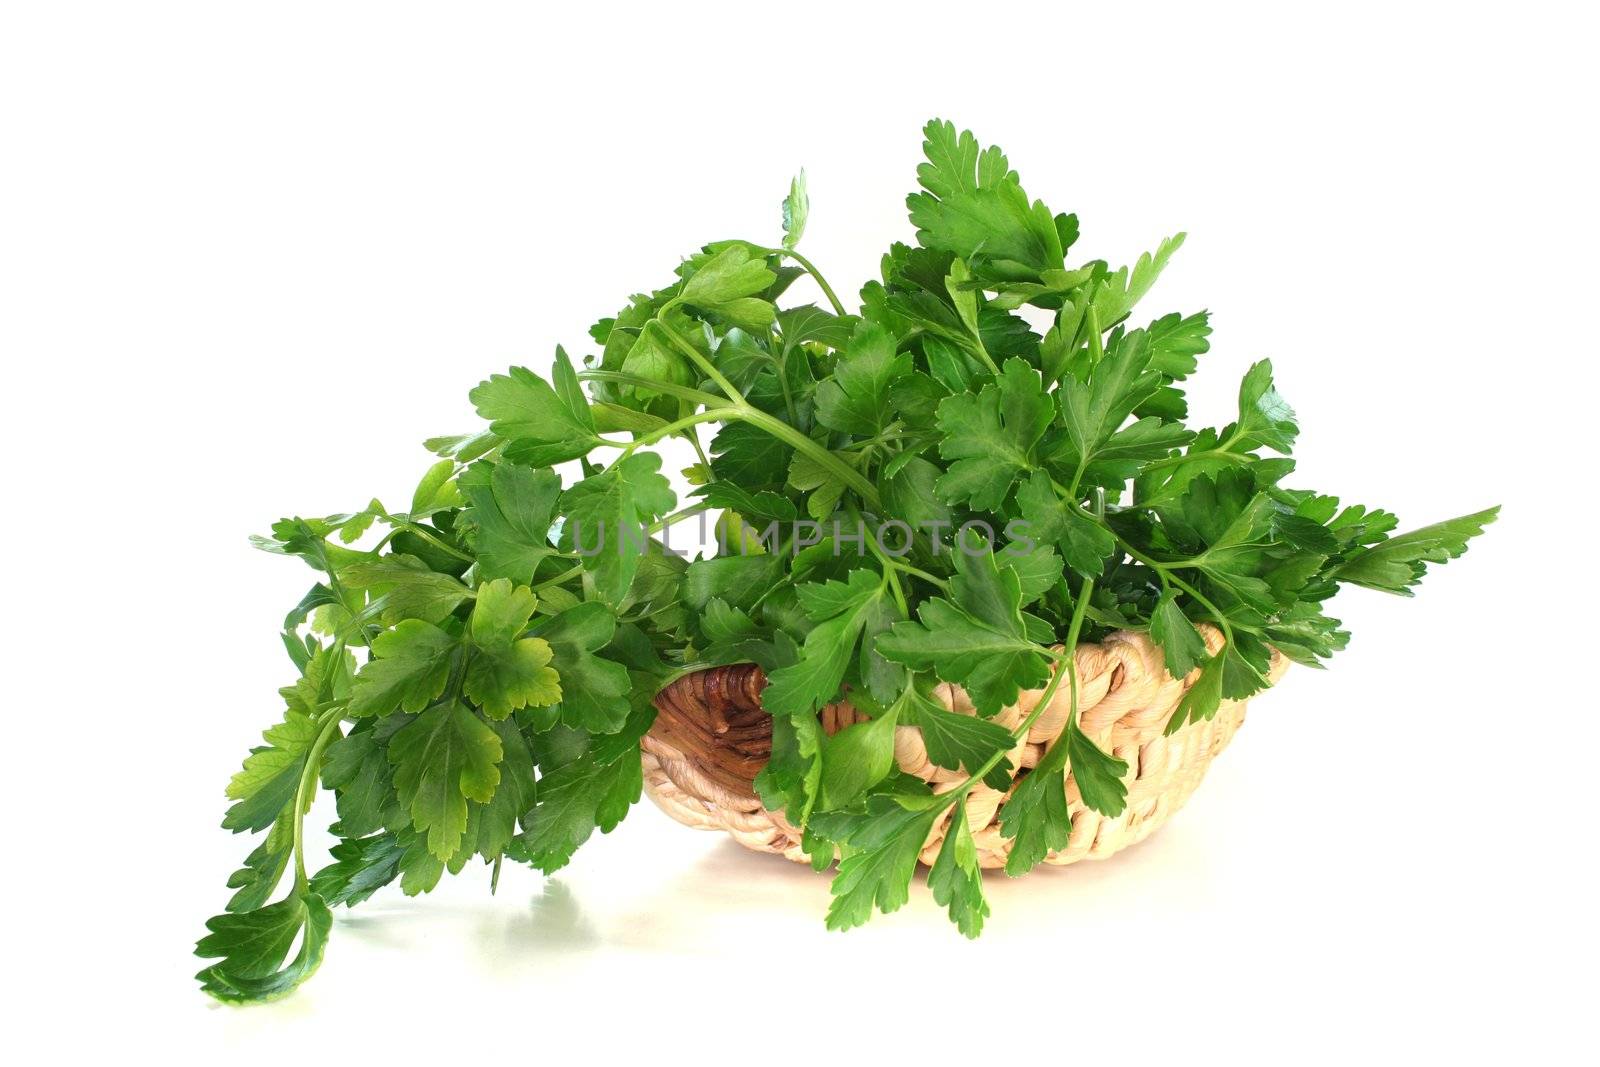 Parsley by discovery